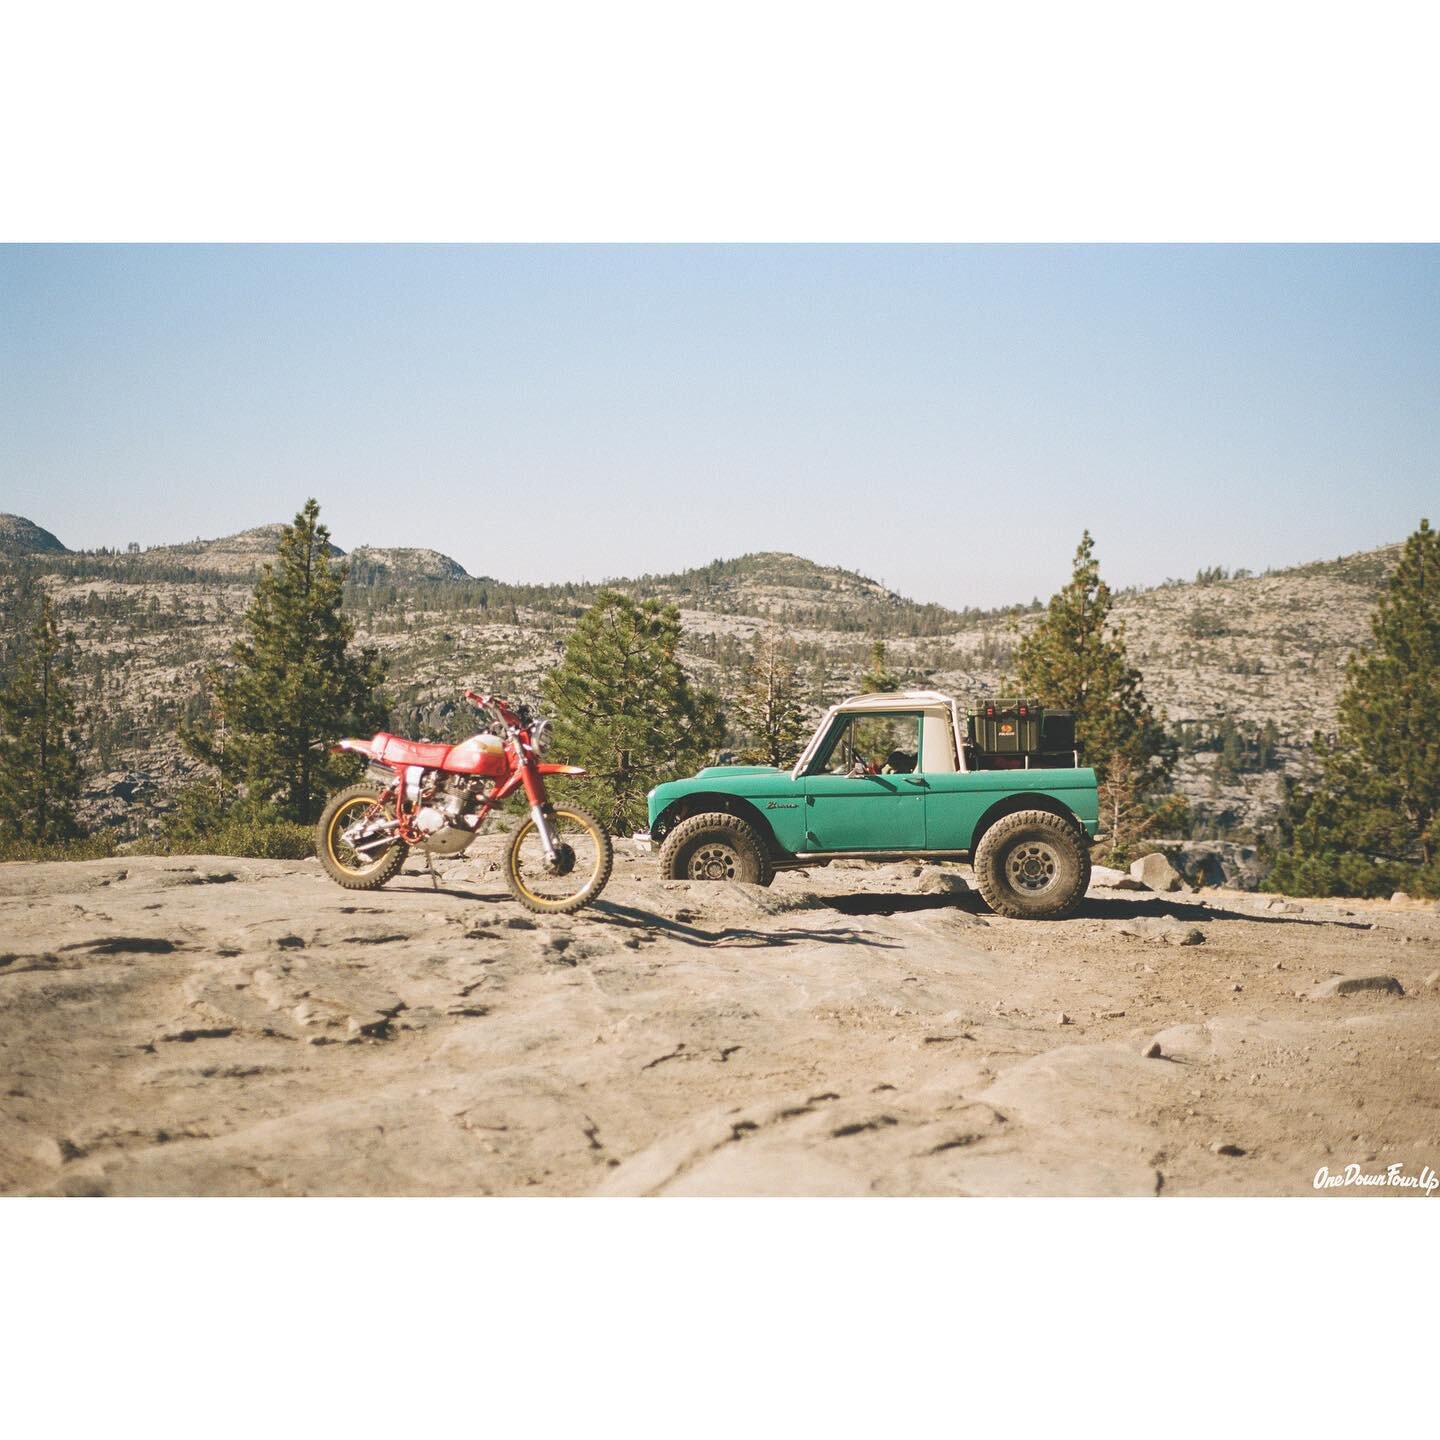 /// My XL250 turned 50 years old this year so we took it through the Rubicon Trail again. The Bronco is a &lsquo;73 as well. #onedownfourup #xl250 #earlybronco